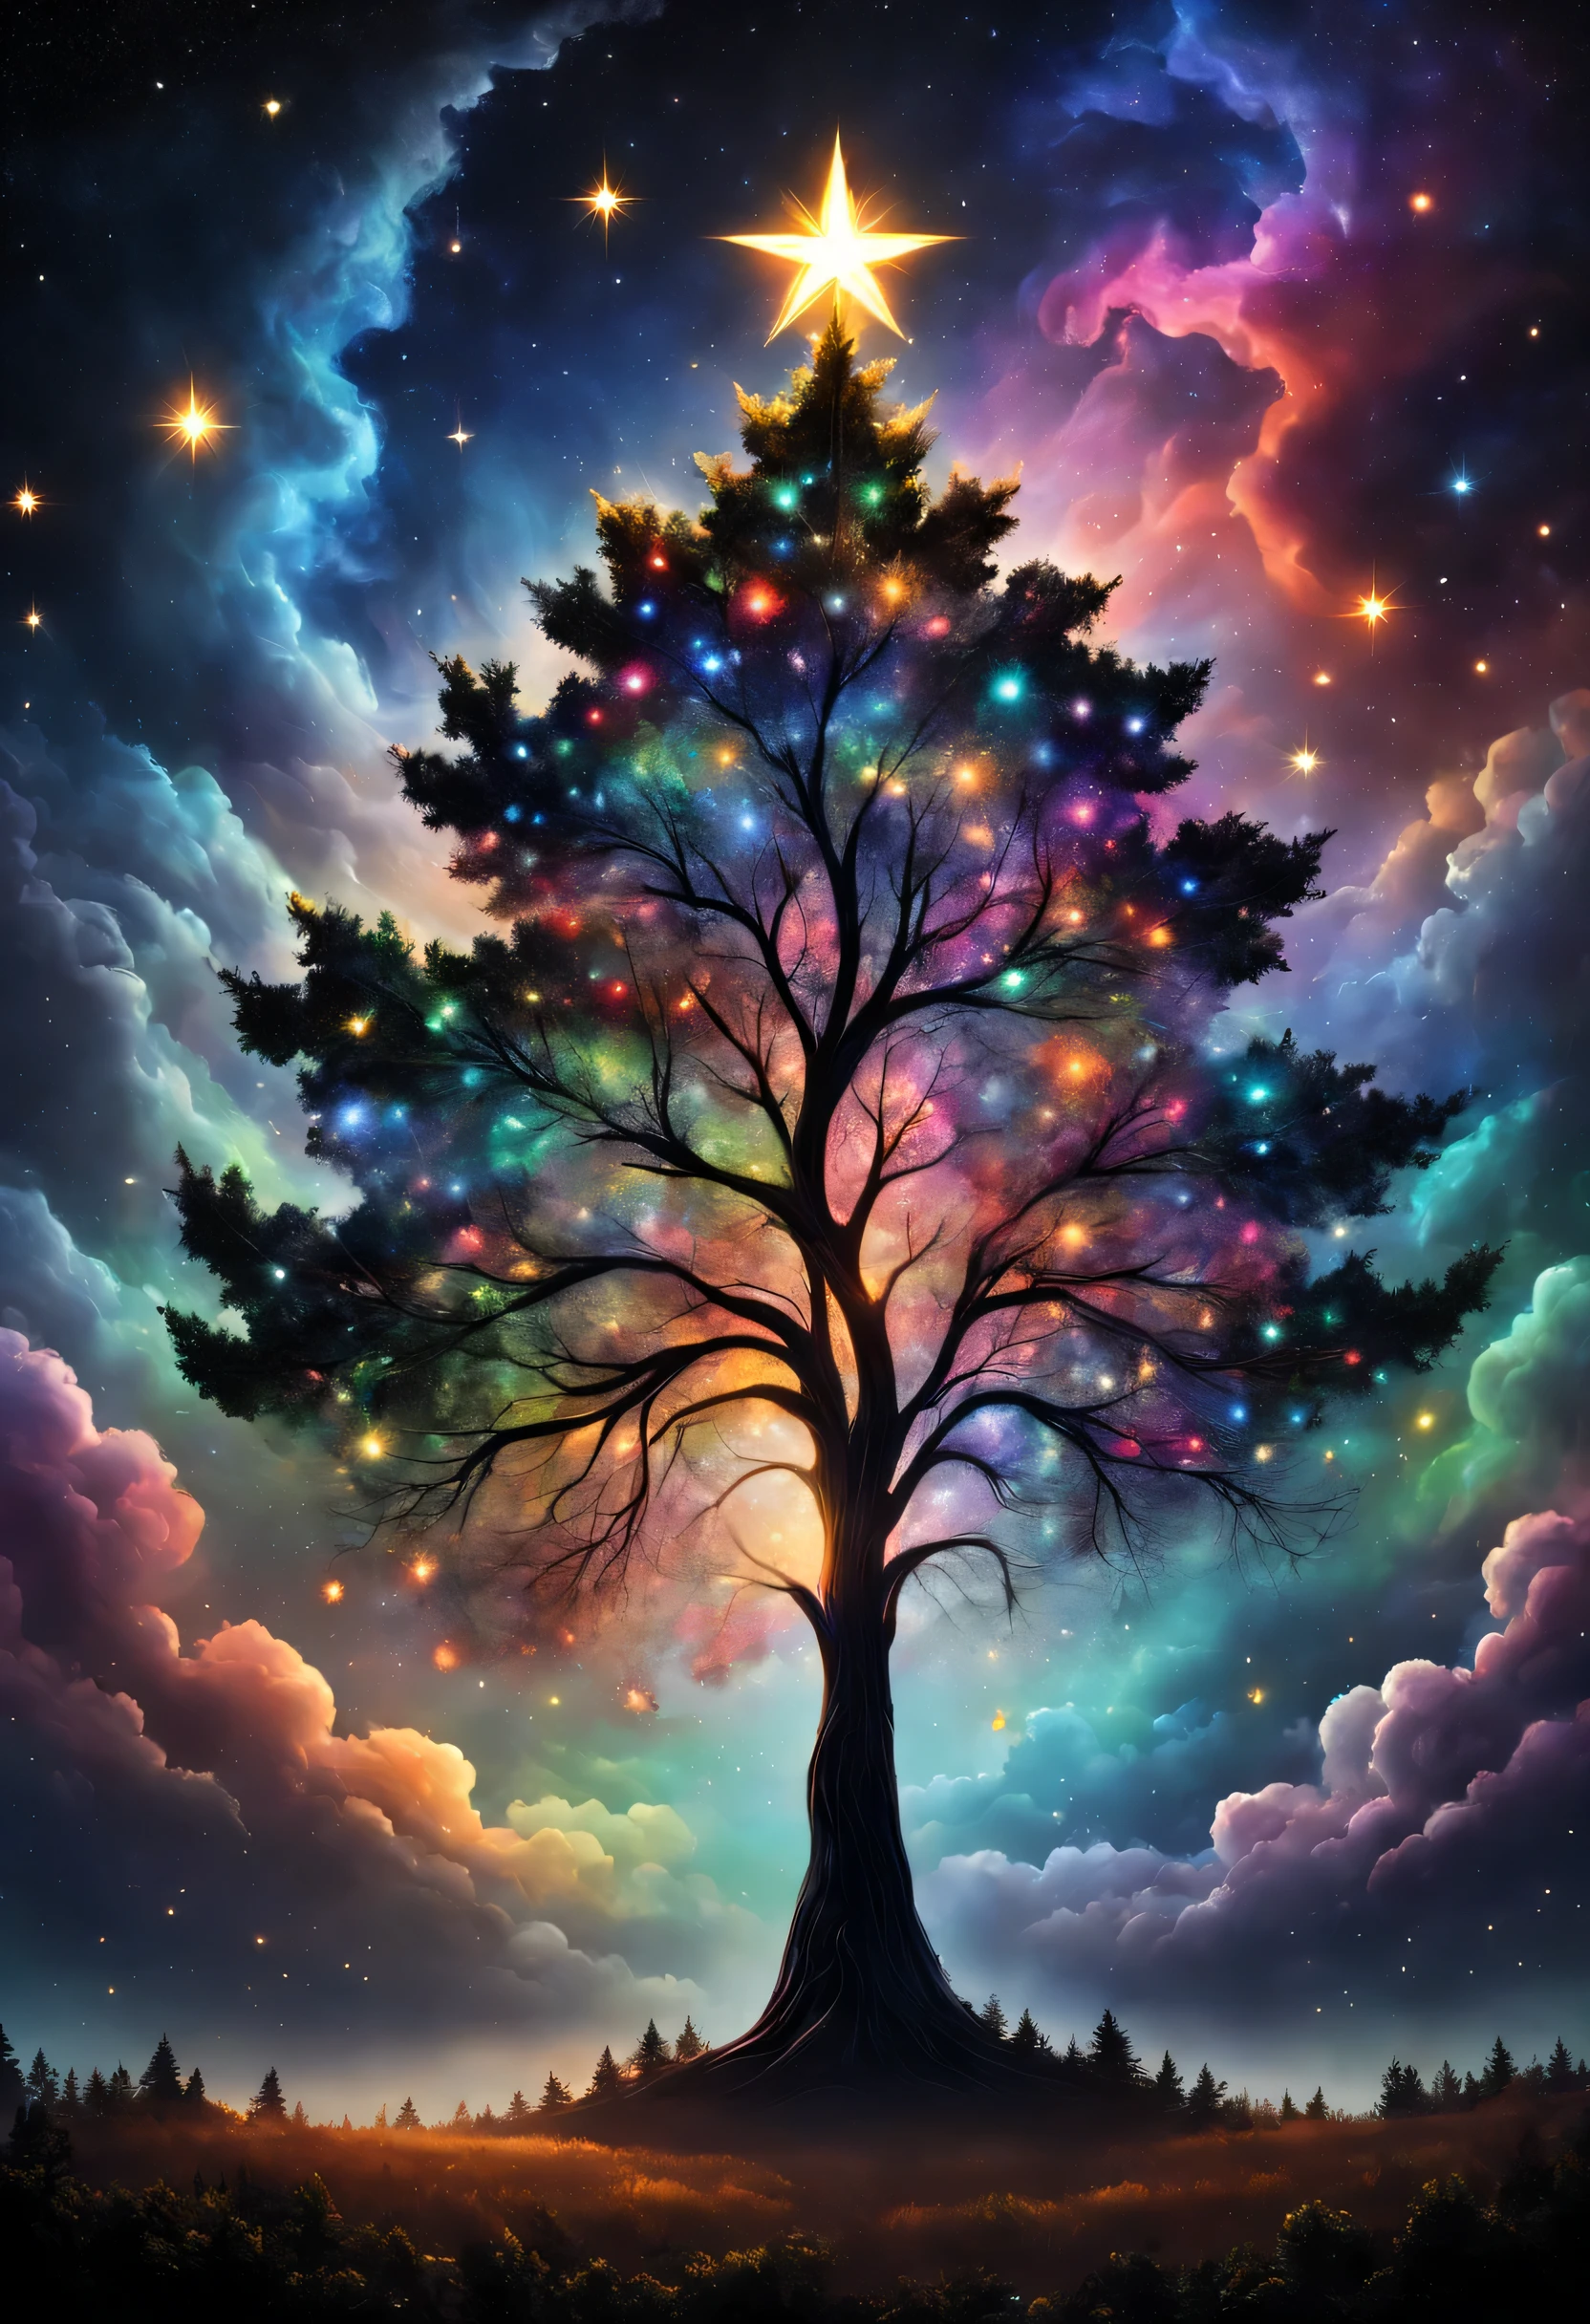 tree silhouettes:A black:Cool,Place many stars at leaf positions,Shining stars:place a big star on the tree,dark night sky background:Colorful clouds,Intricate details,T-Mastepiece